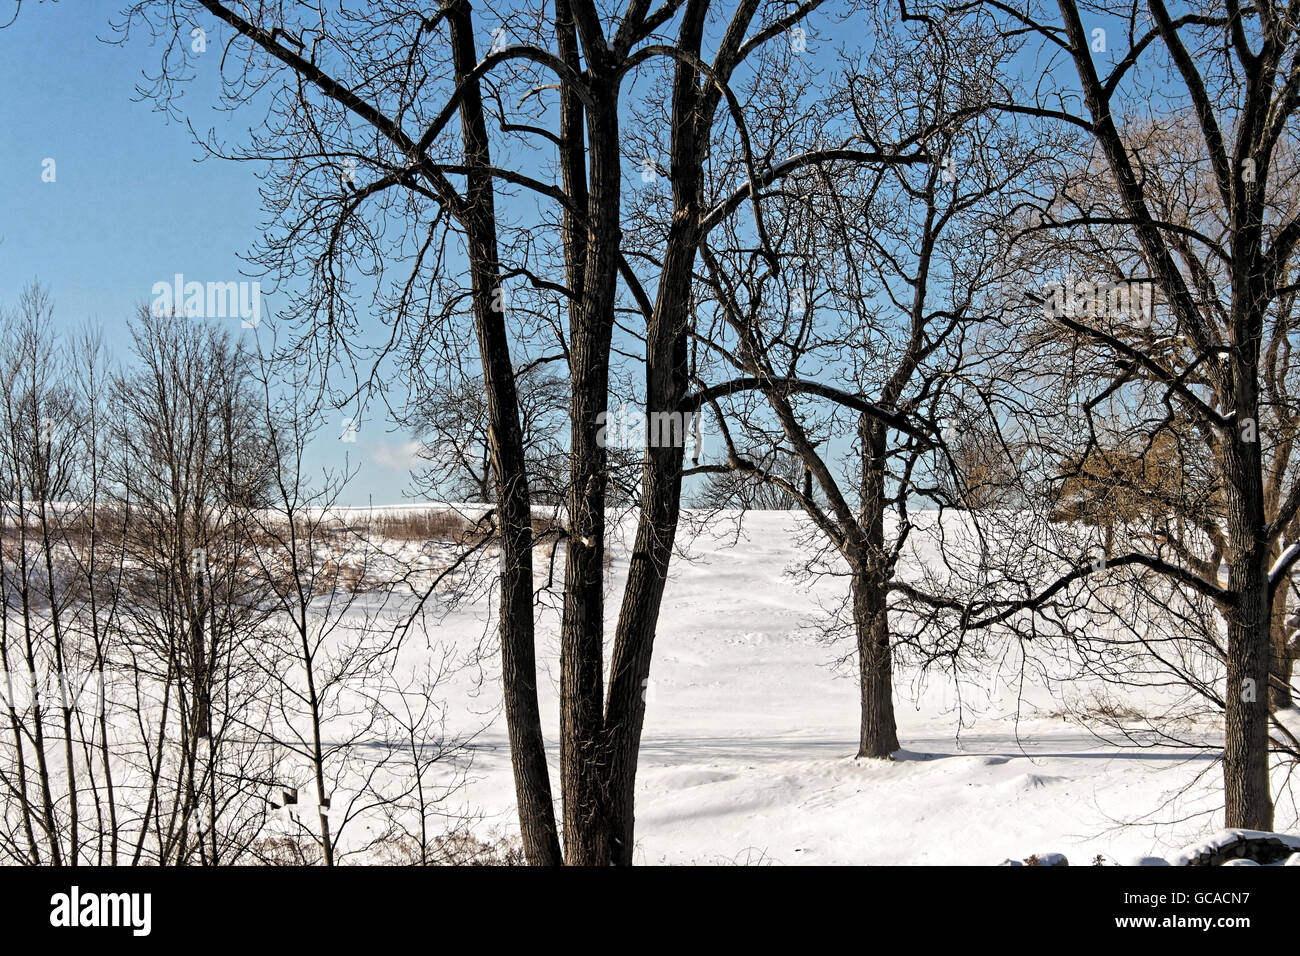 Snowy Winter landscape with bare trees. Stock Photo